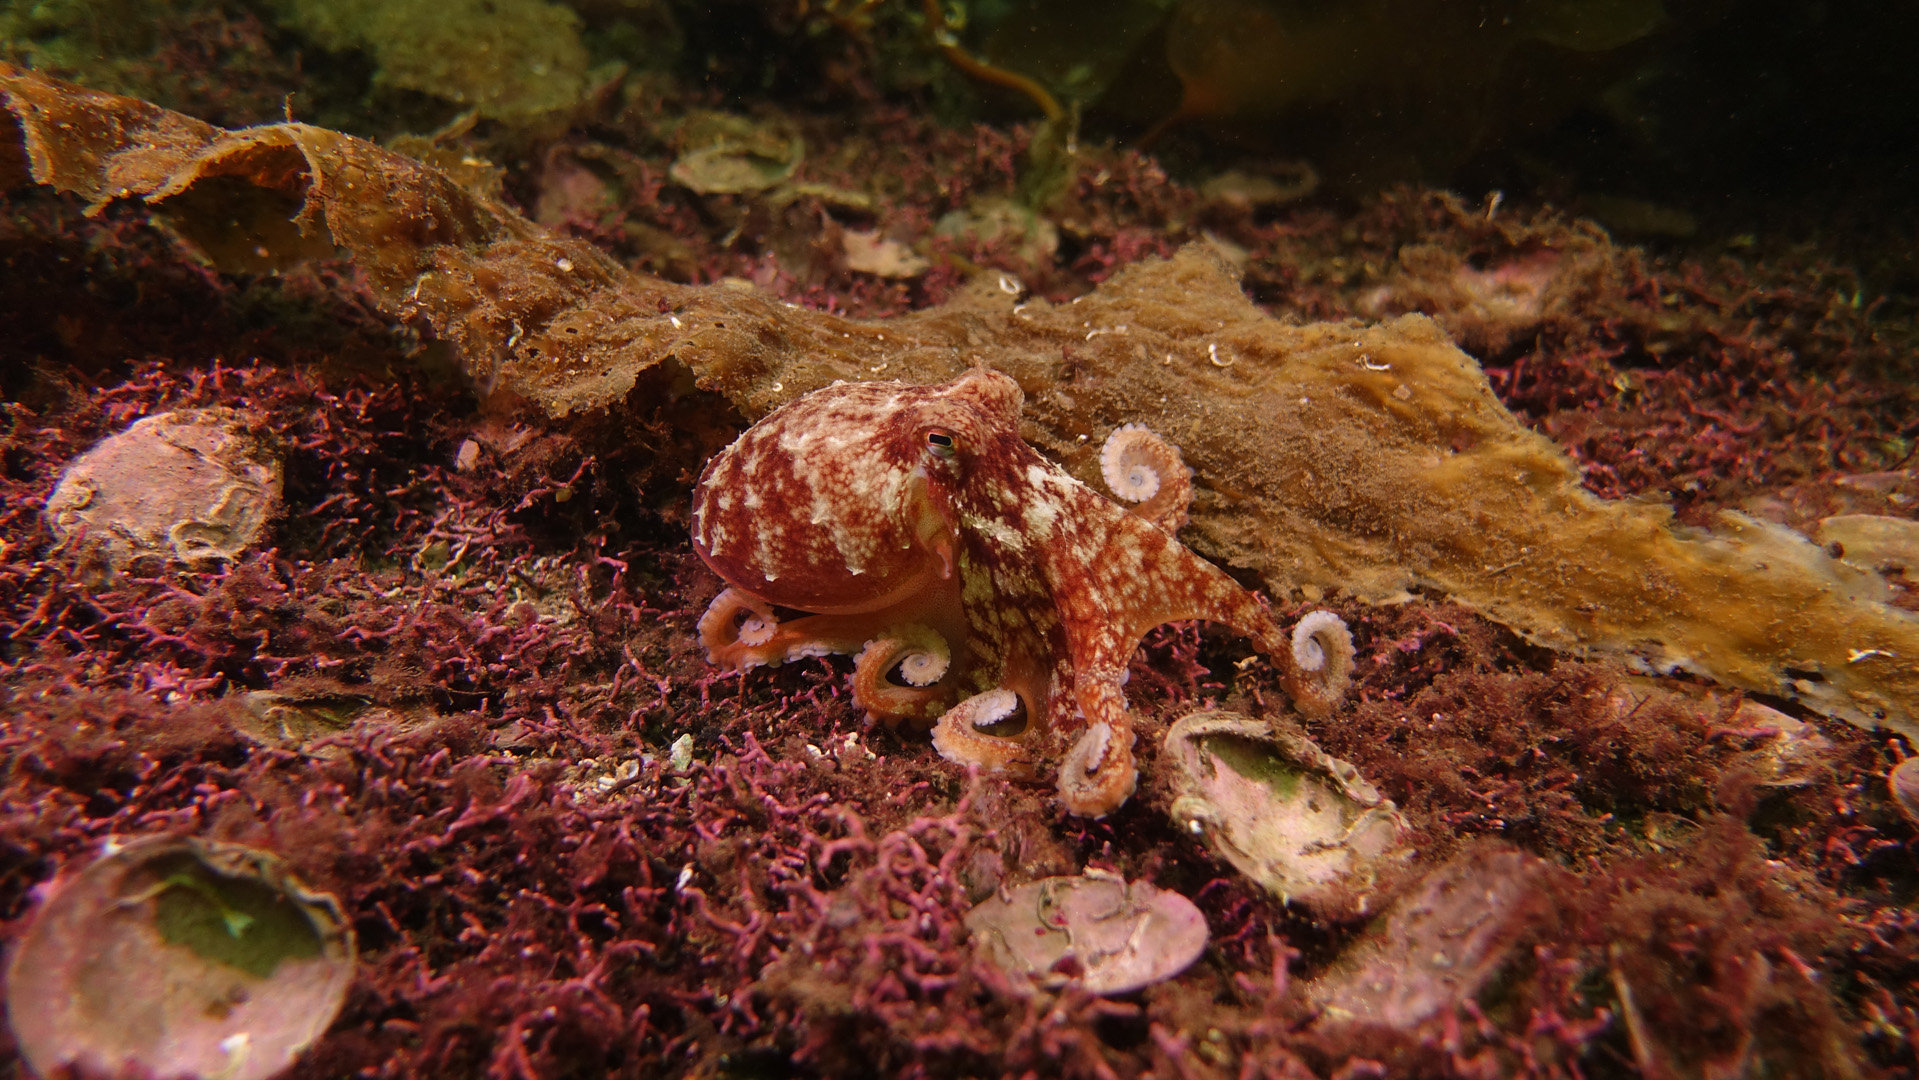 Octopus on maerl bed (photo: Howard Wood)